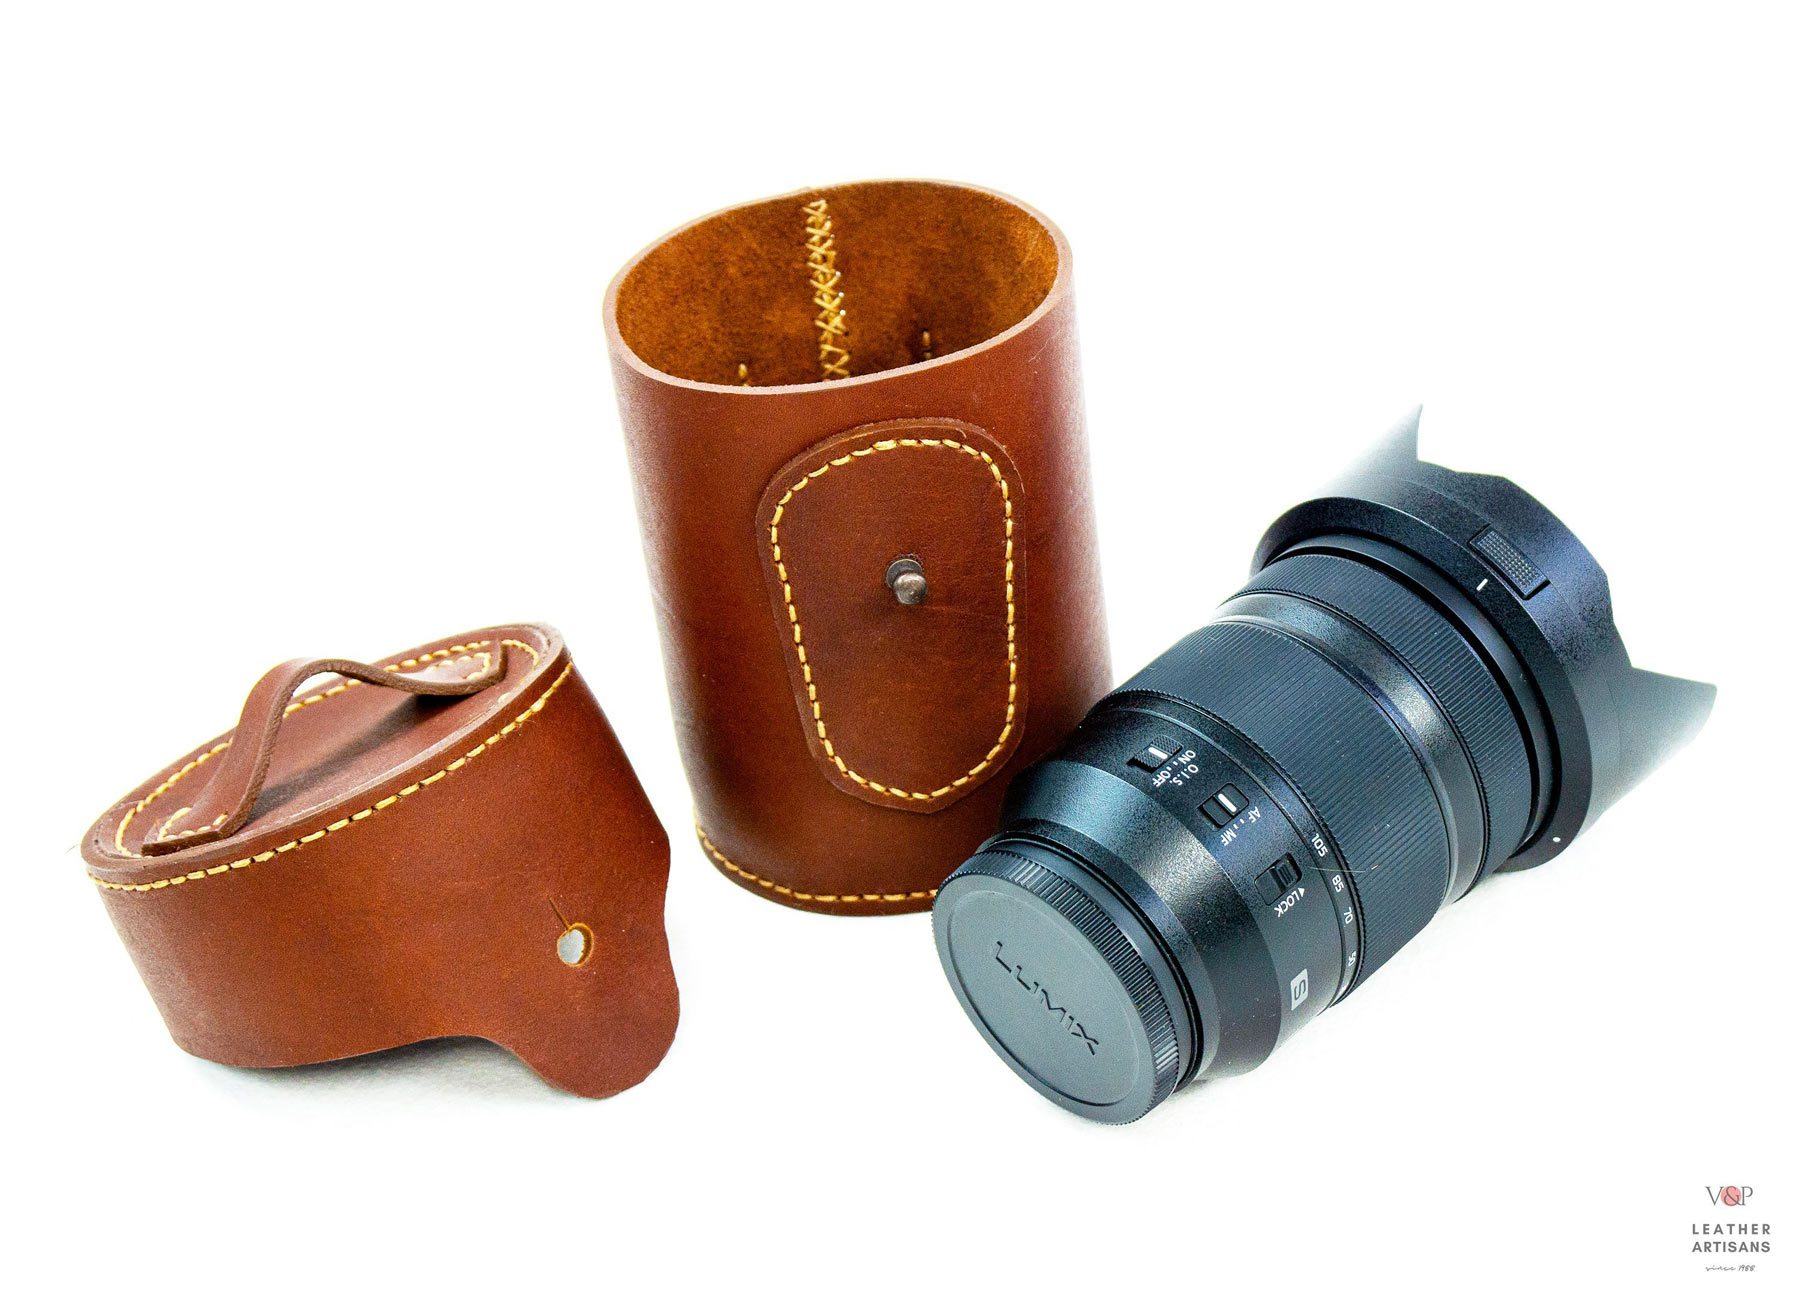 Leather Camera Case Pattern | Leather Case for Camera Lens | DIY Leather Case PDF pattern V&P Leather Artisans 